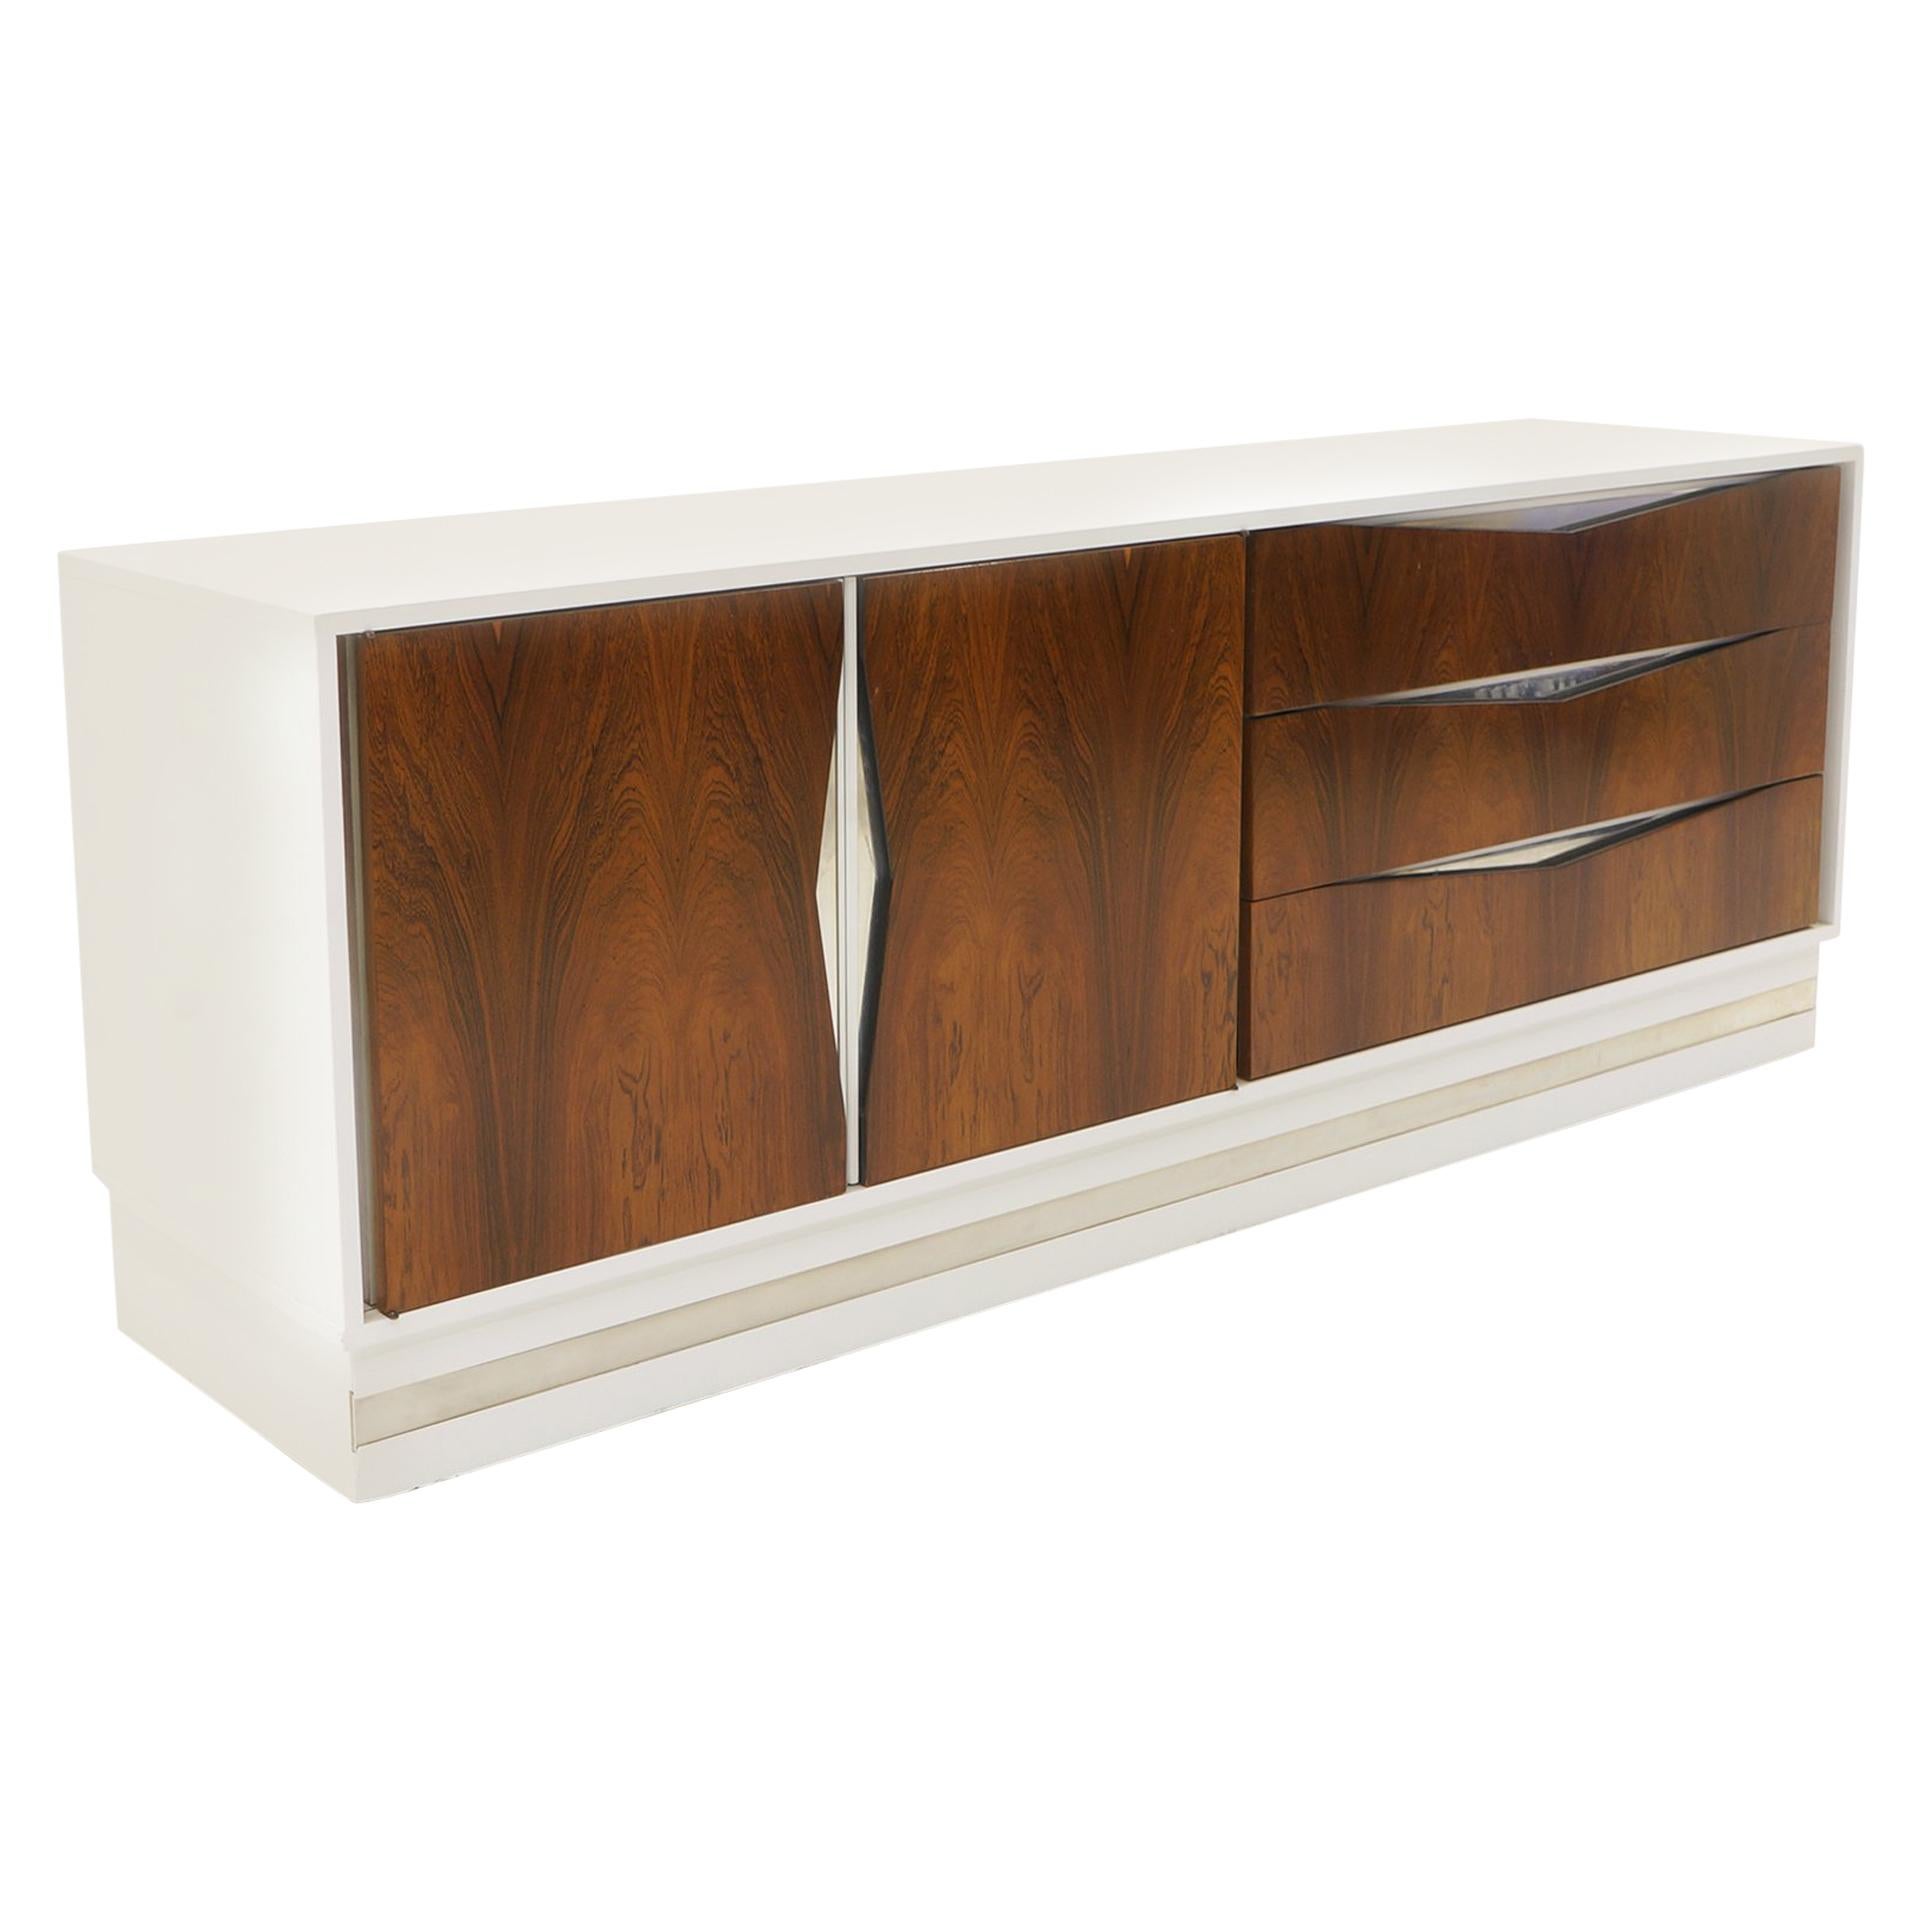 Six-Drawer Dresser, White Case with Rosewood Fronts and Chrome Accents